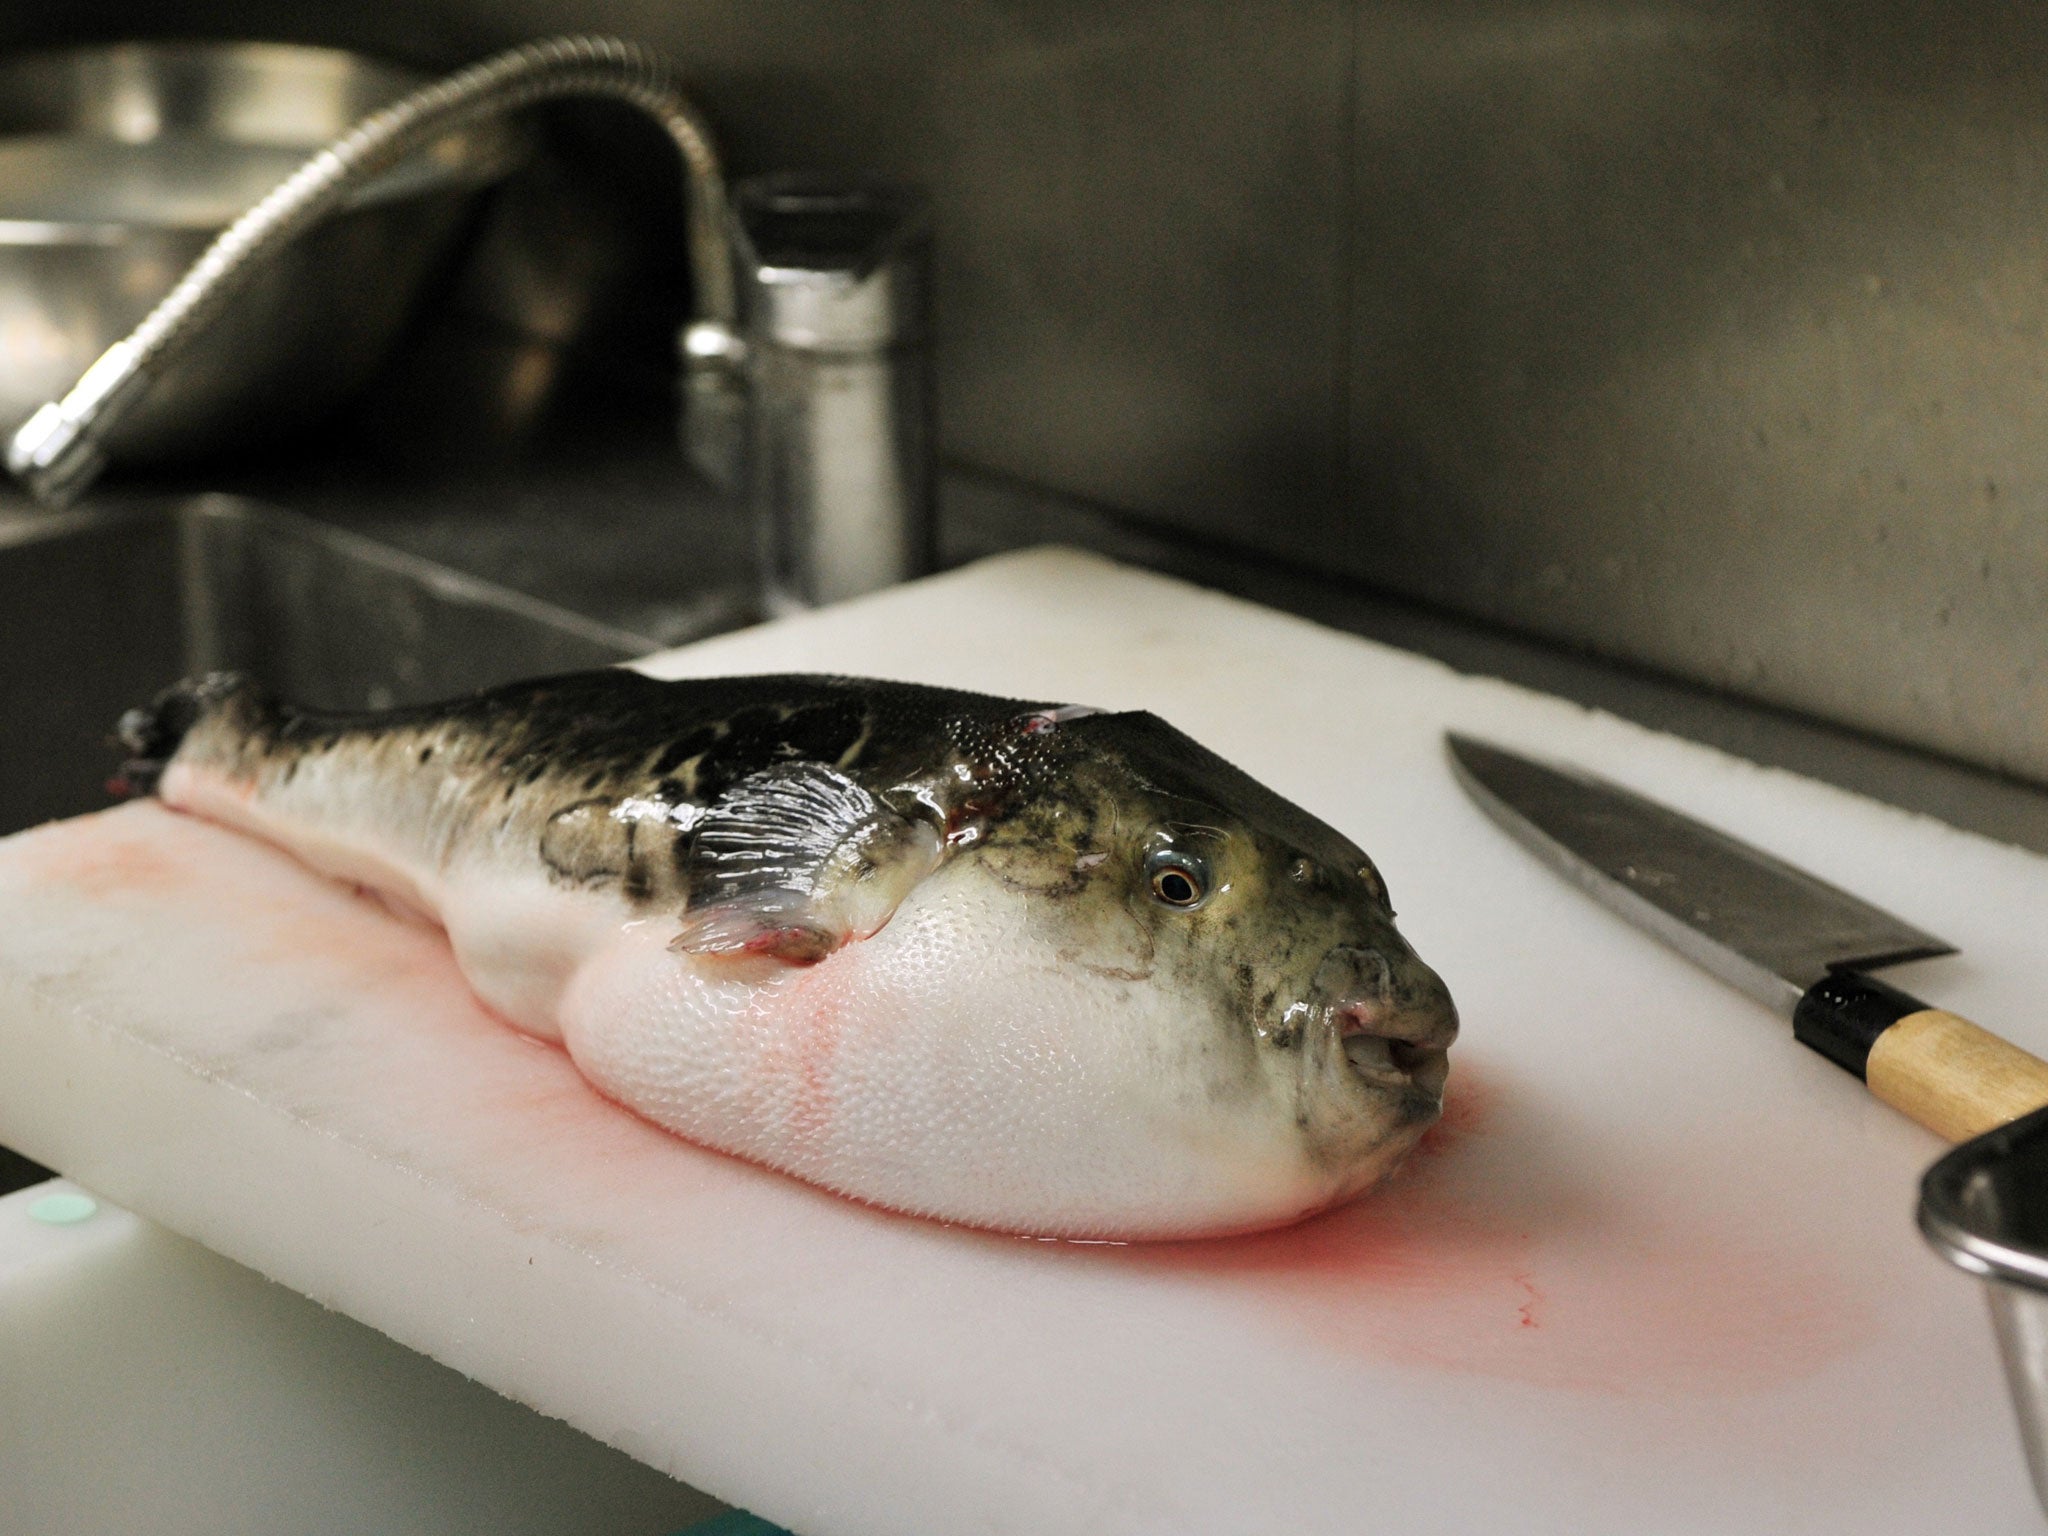 Japanese Blowfish contains toxic poisons that can prove fatal if it is not prepared correctly